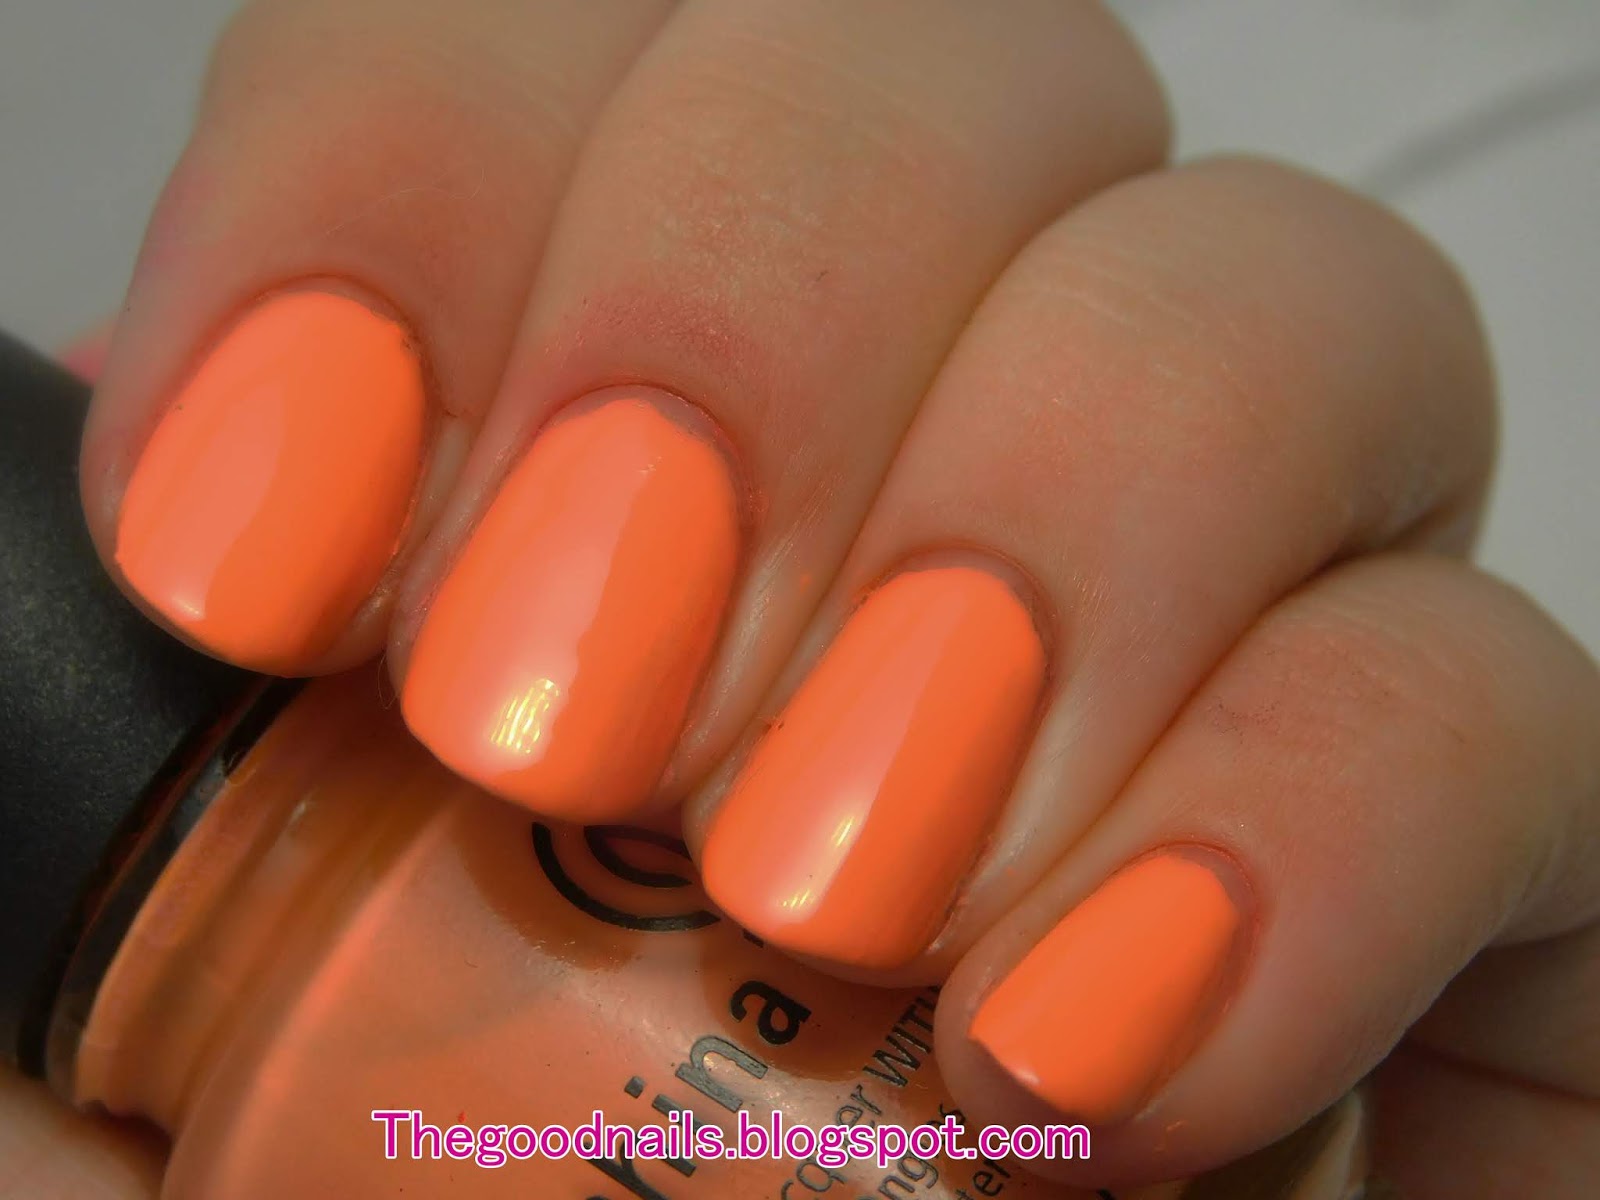 9. Sinful Colors Professional Nail Polish in "Peachy Keen" - wide 2